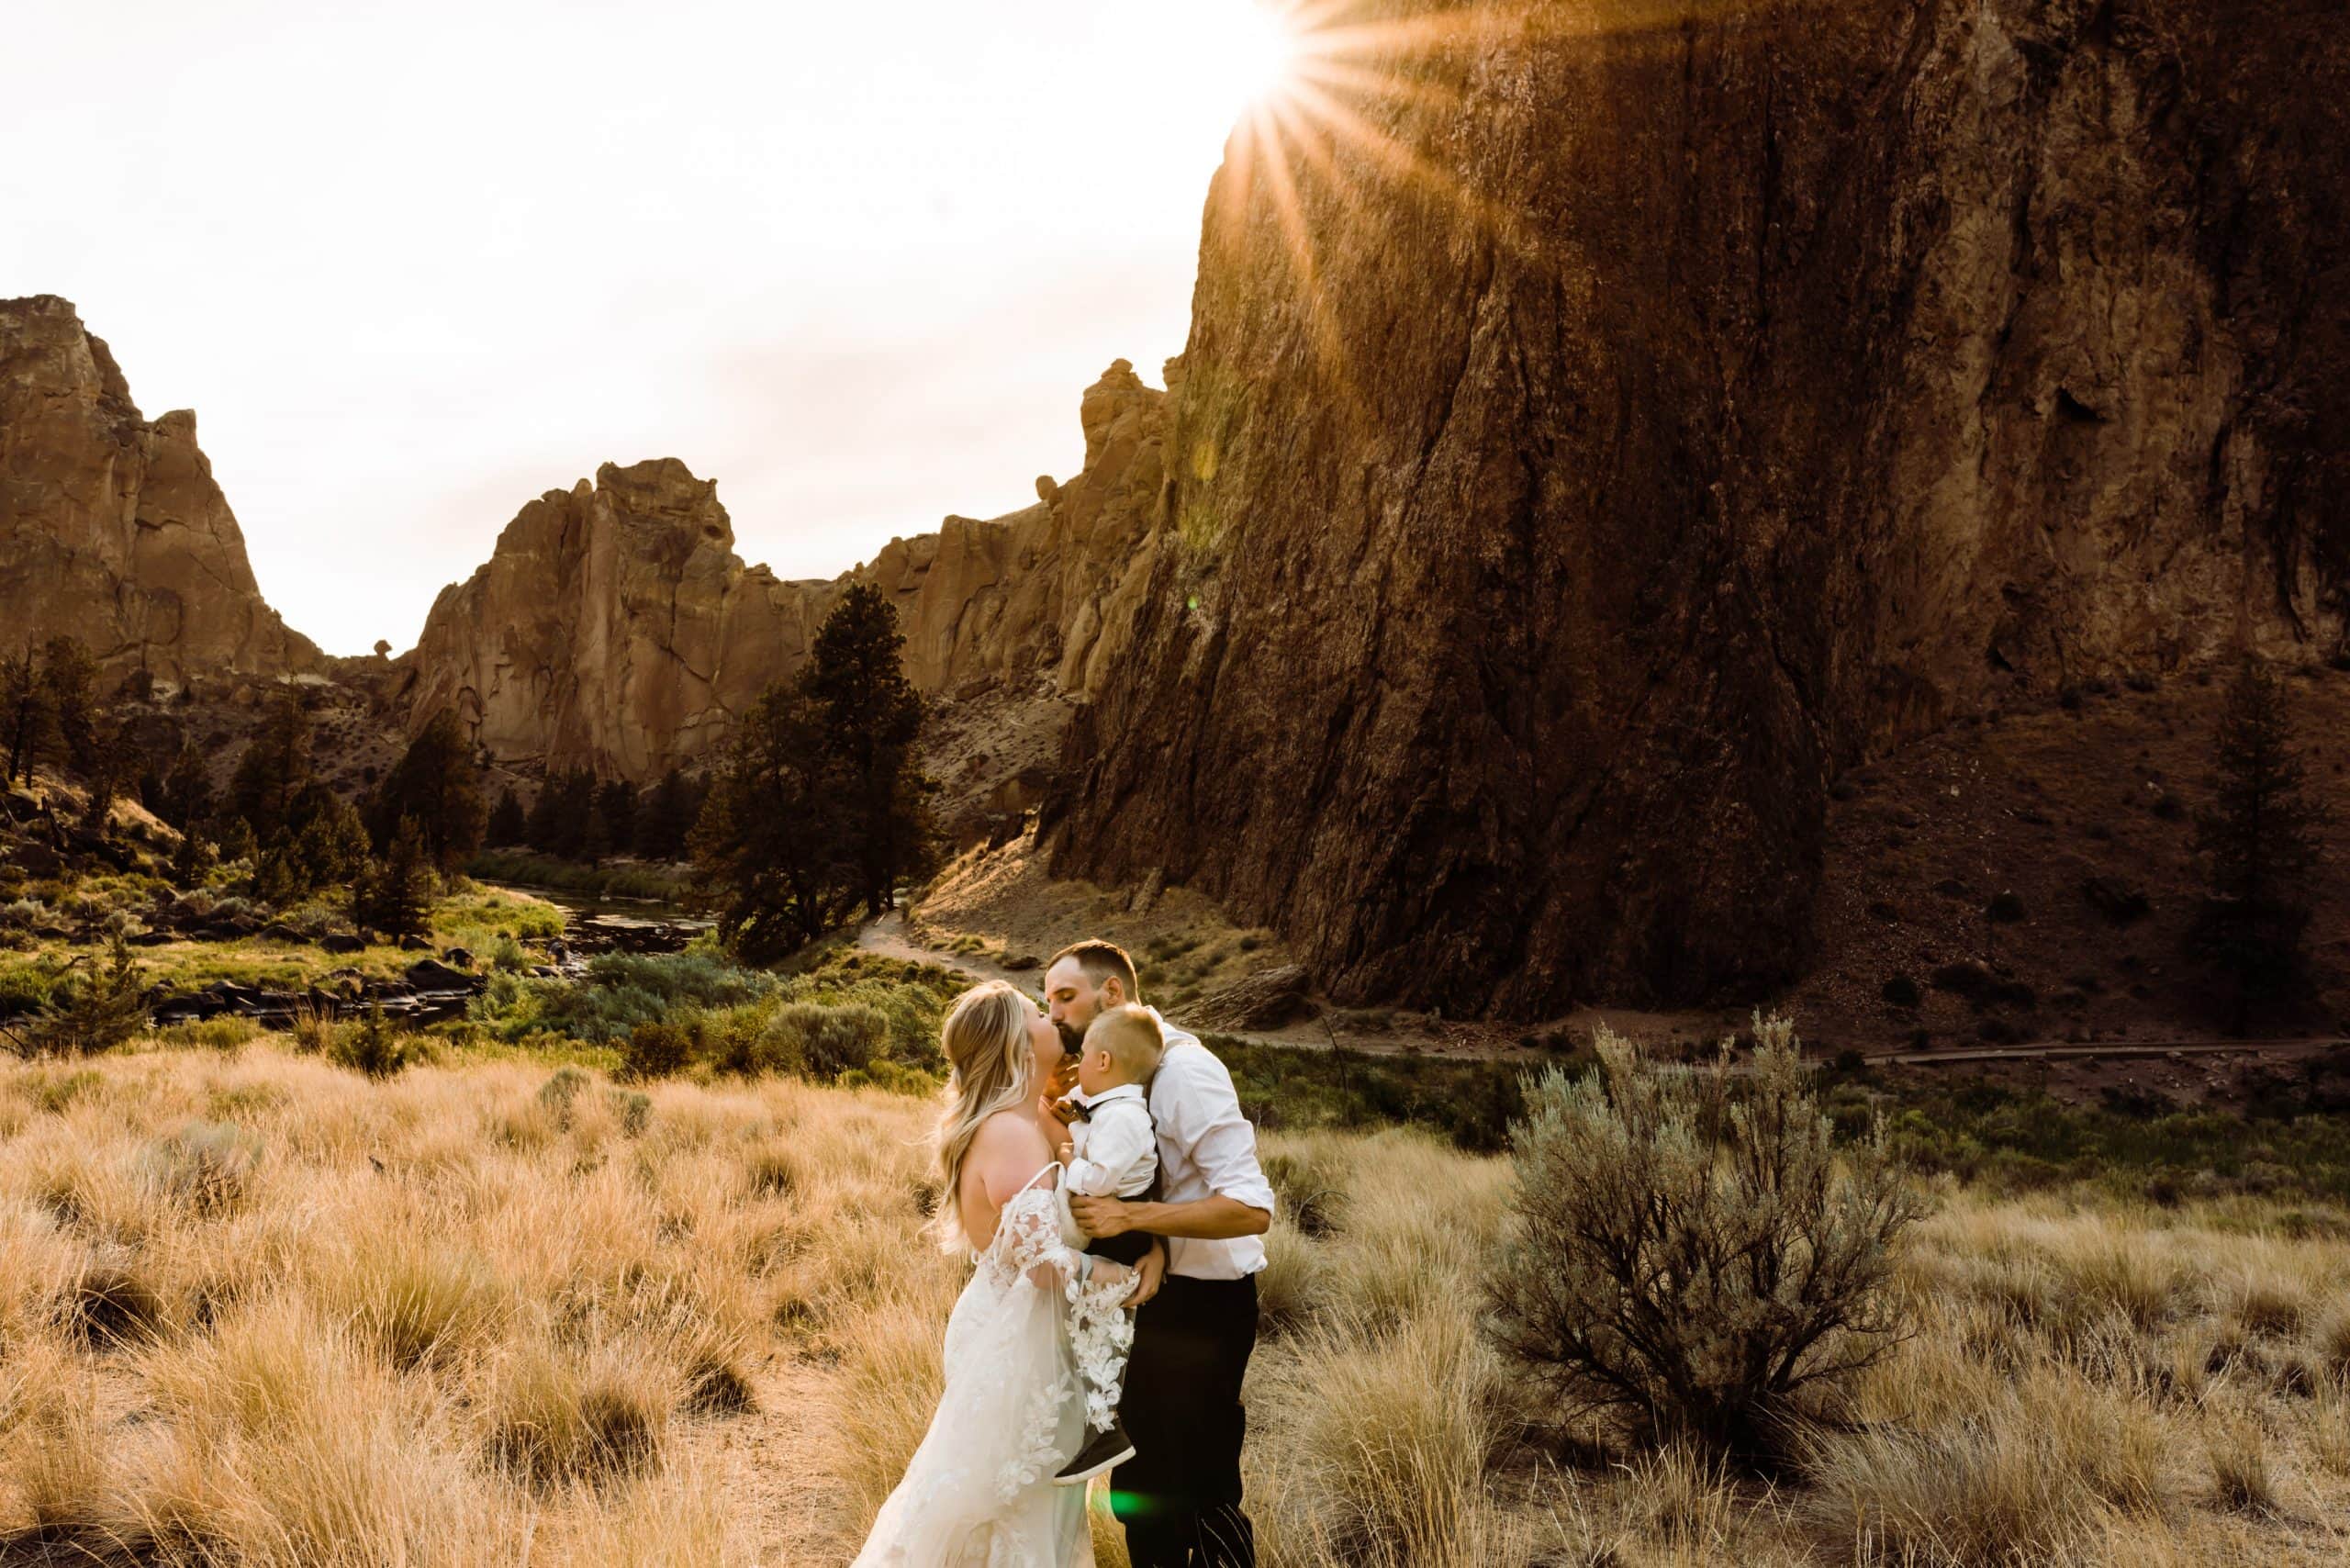 Family elopement at Smith Rock State Park Pacific Northwest.